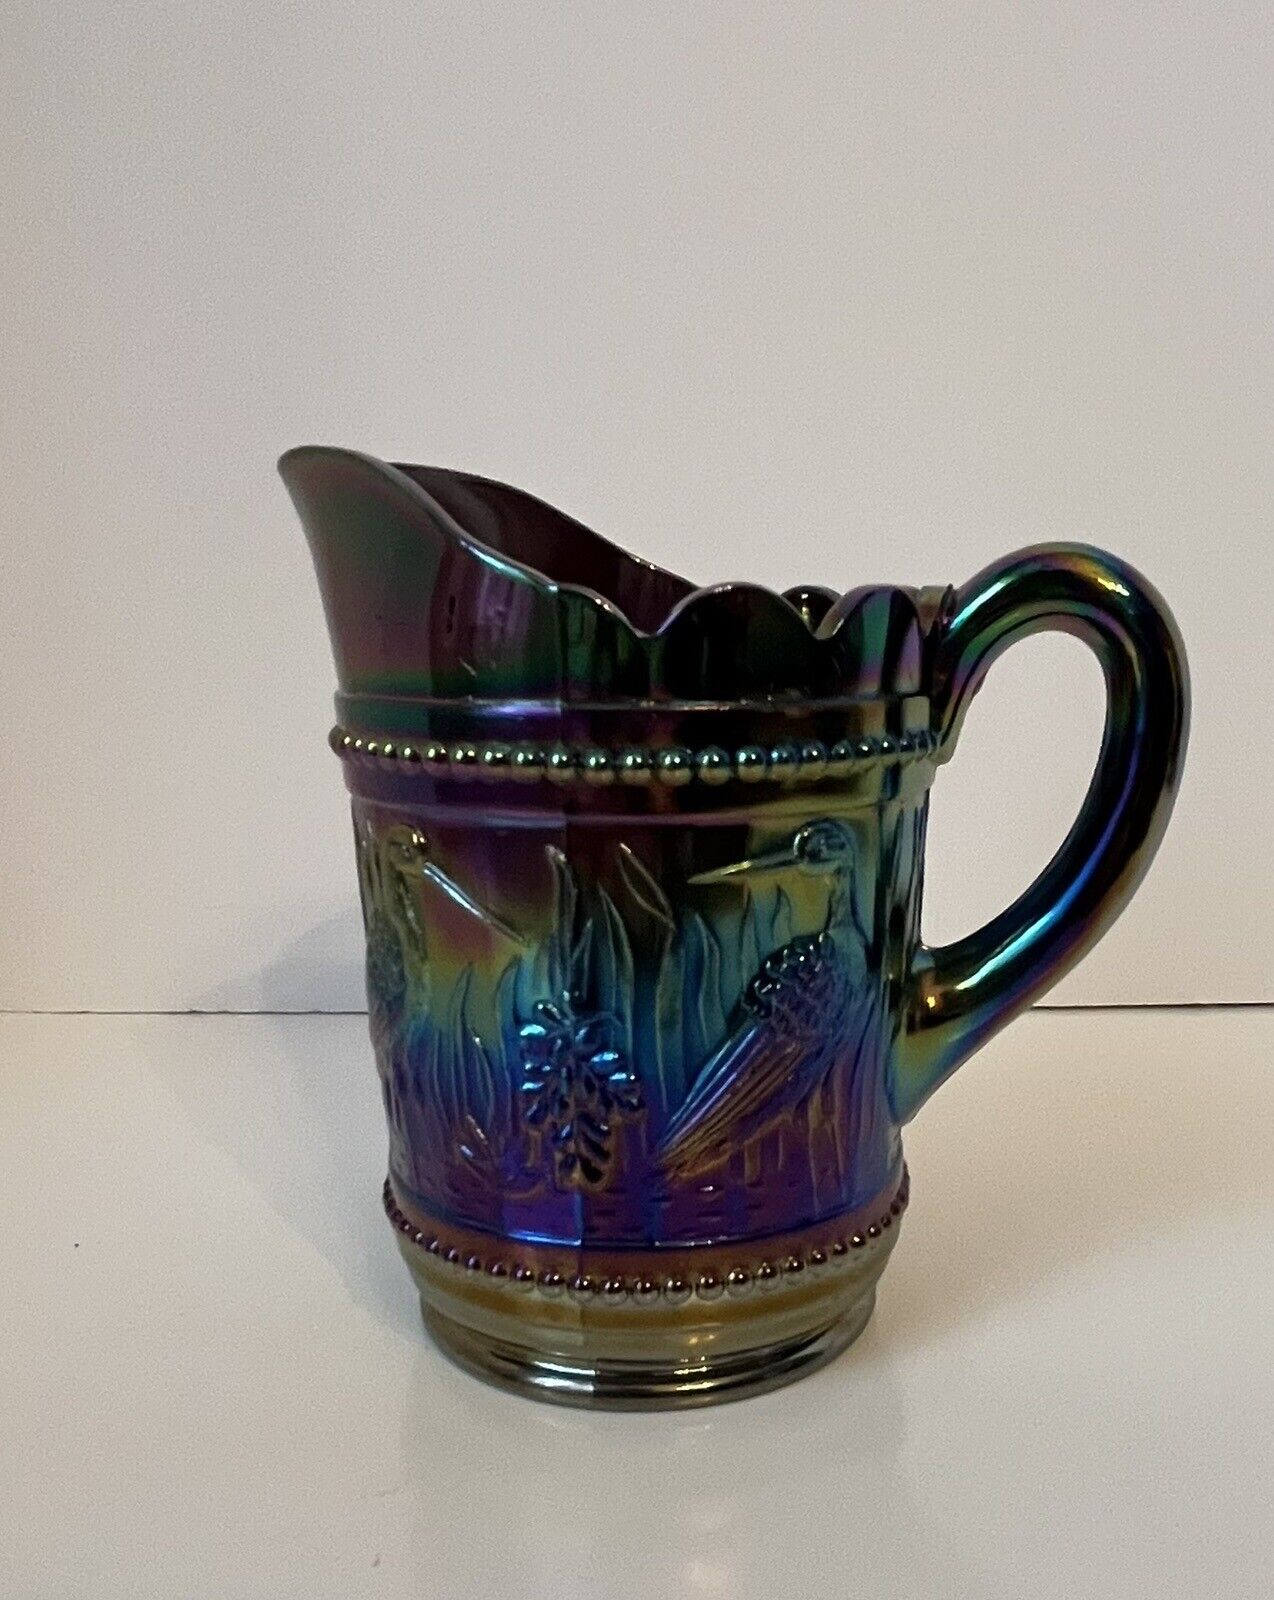 LG Wright “Stork in the Rushes” Carnival Glass Pitcher